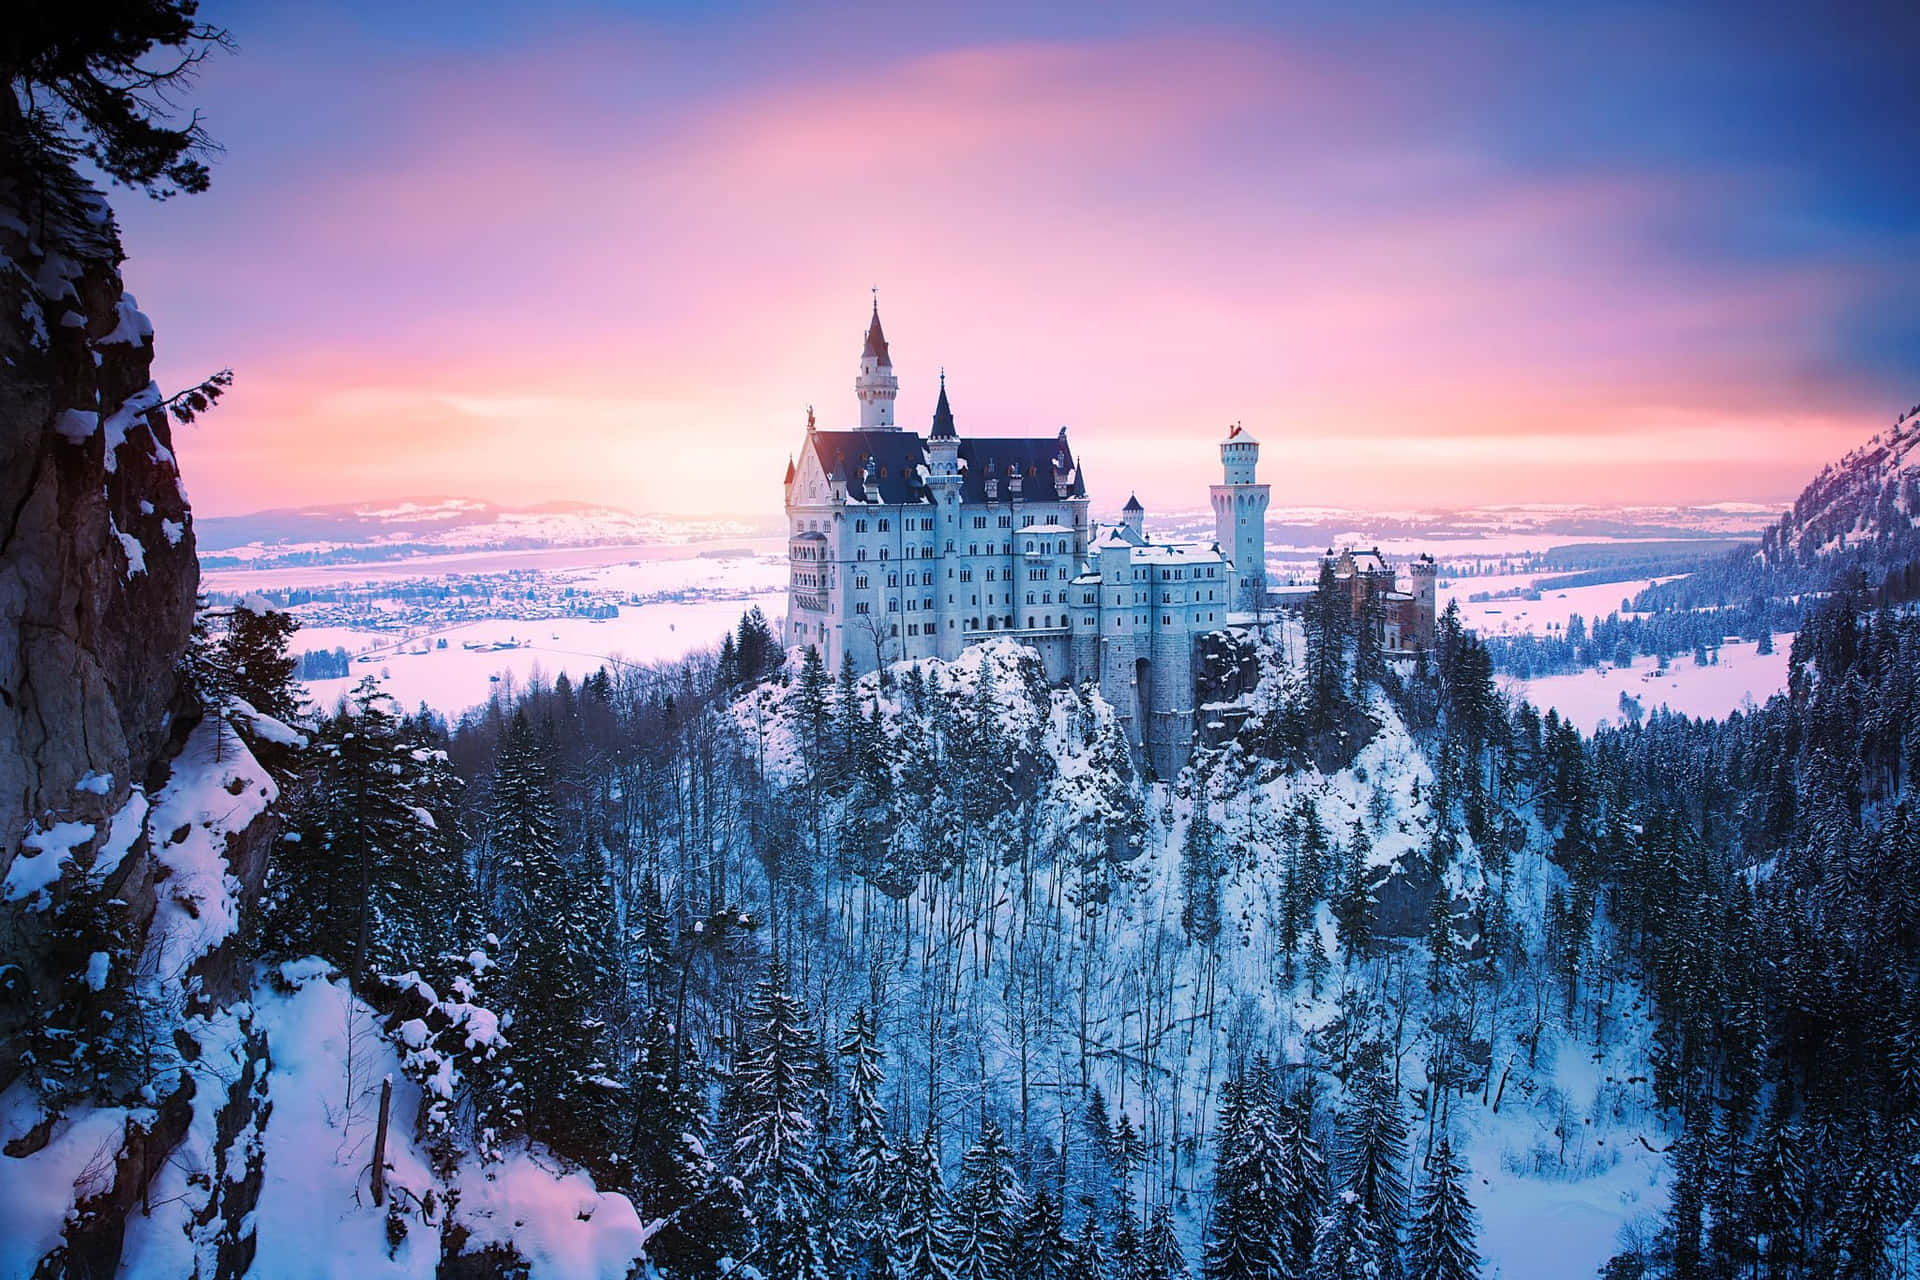 A stunning image of a castle perched atop a hill in the middle of a foggy valley.